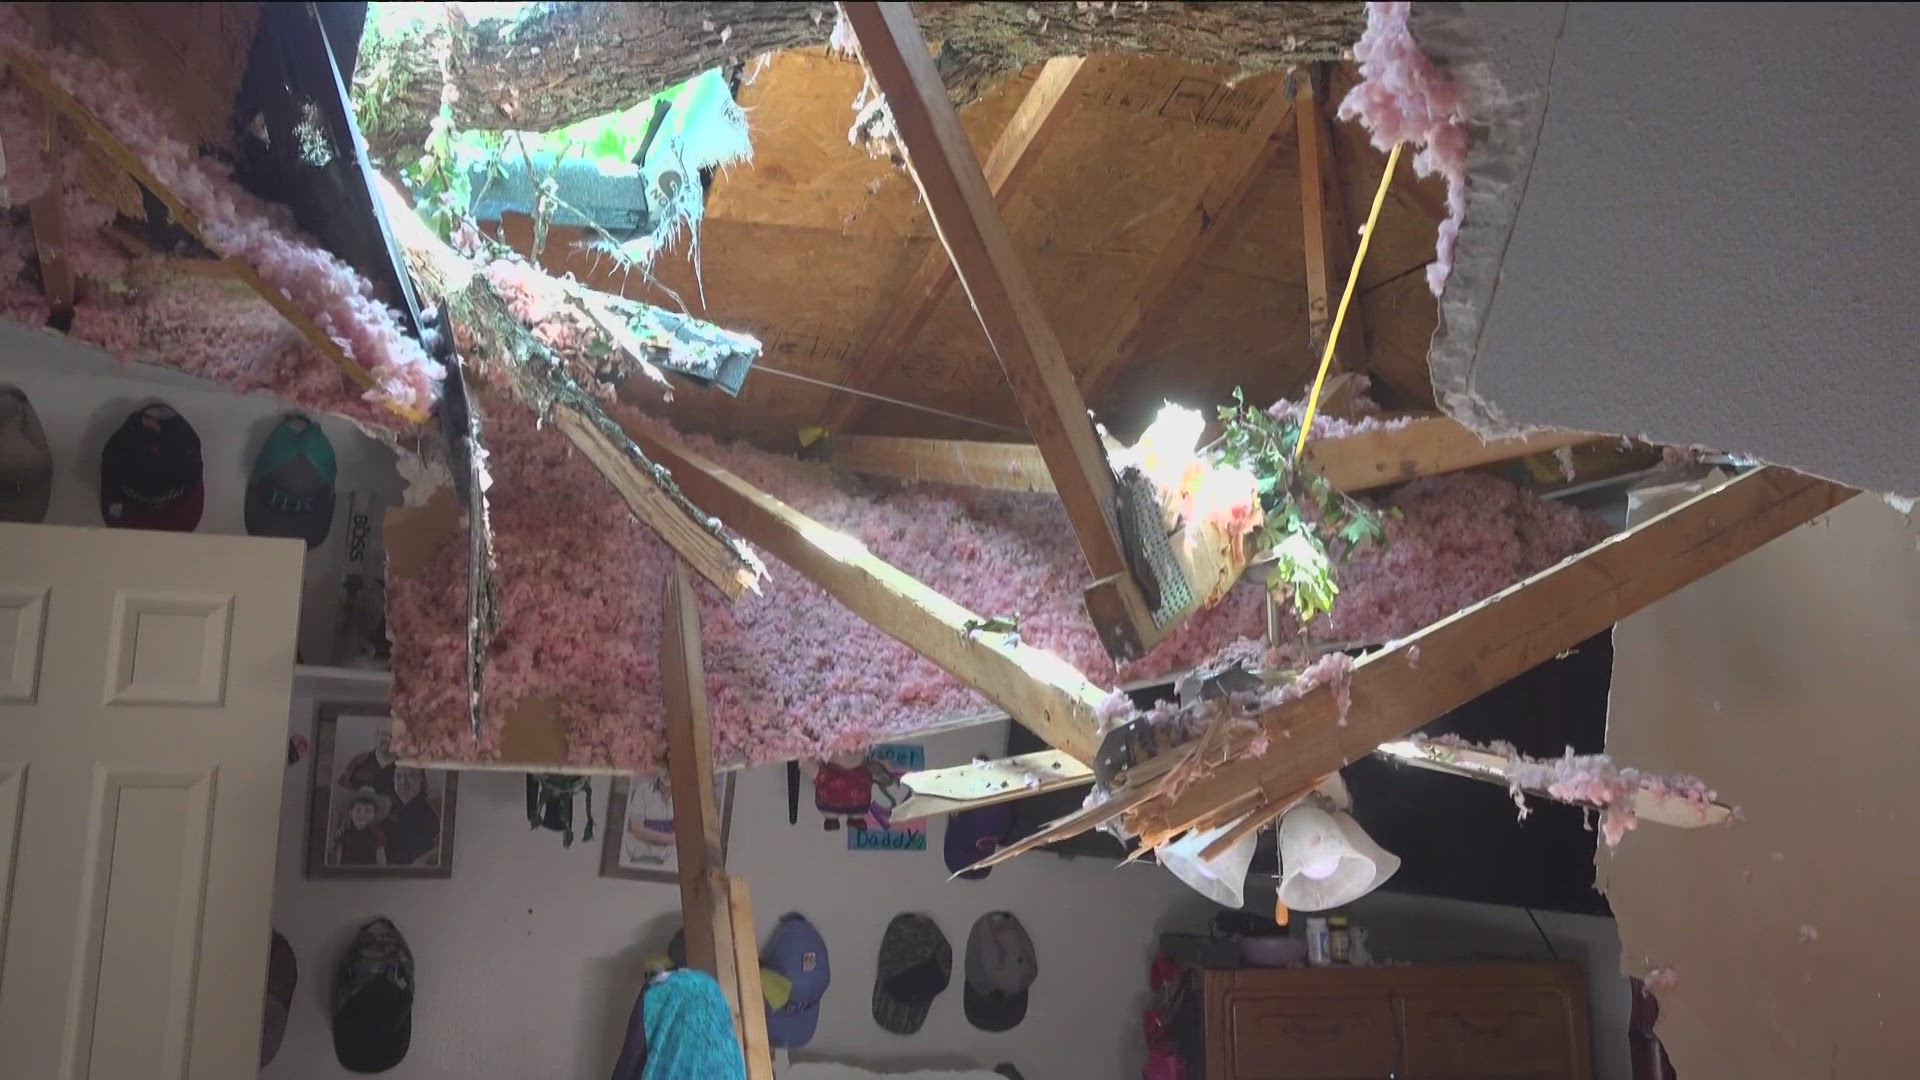 Minutes after one man got out of bed during Sunday's storms, his husband said a tree fell through their bedroom.